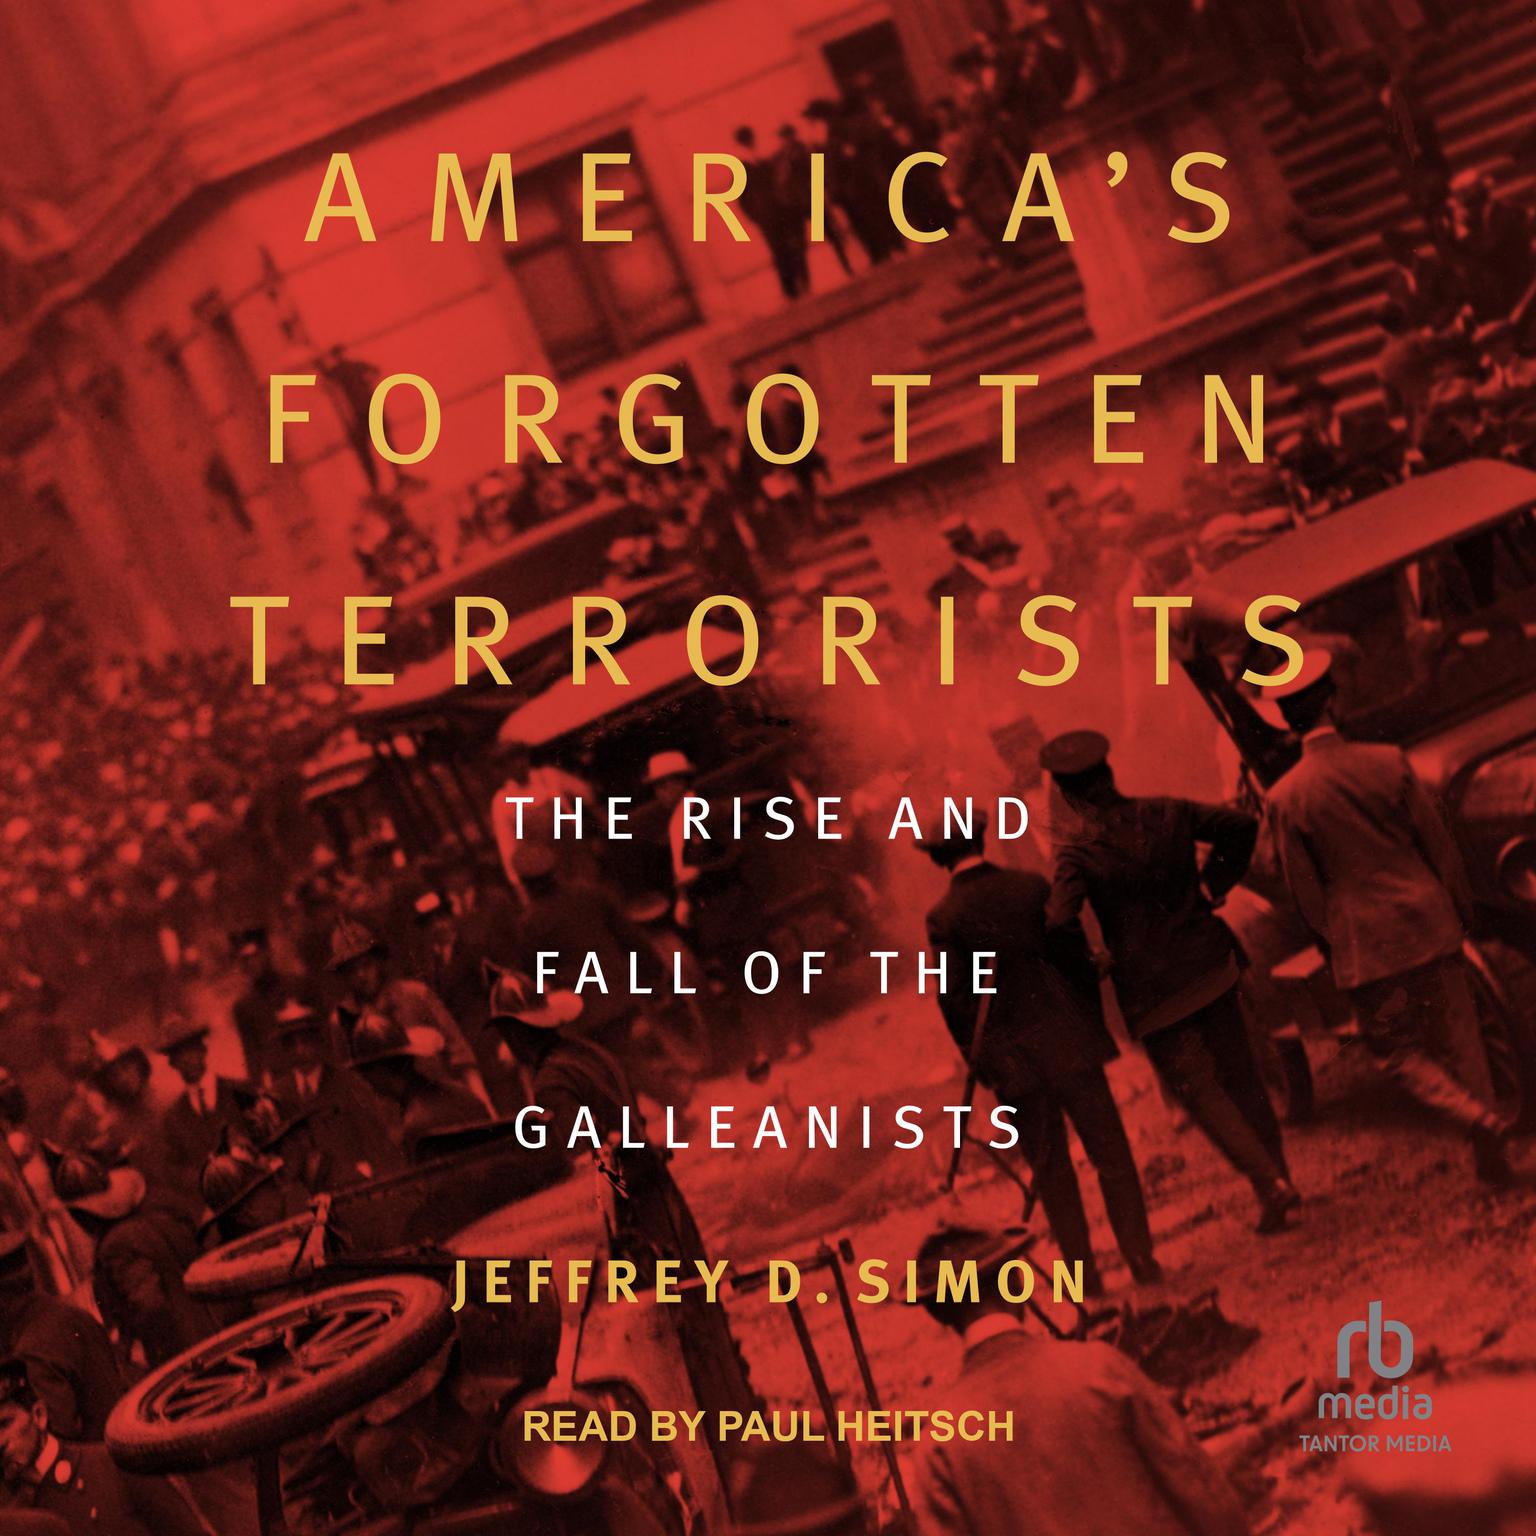 Americas Forgotten Terrorists: The Rise and Fall of the Galleanists Audiobook, by Jeffrey D. Simon